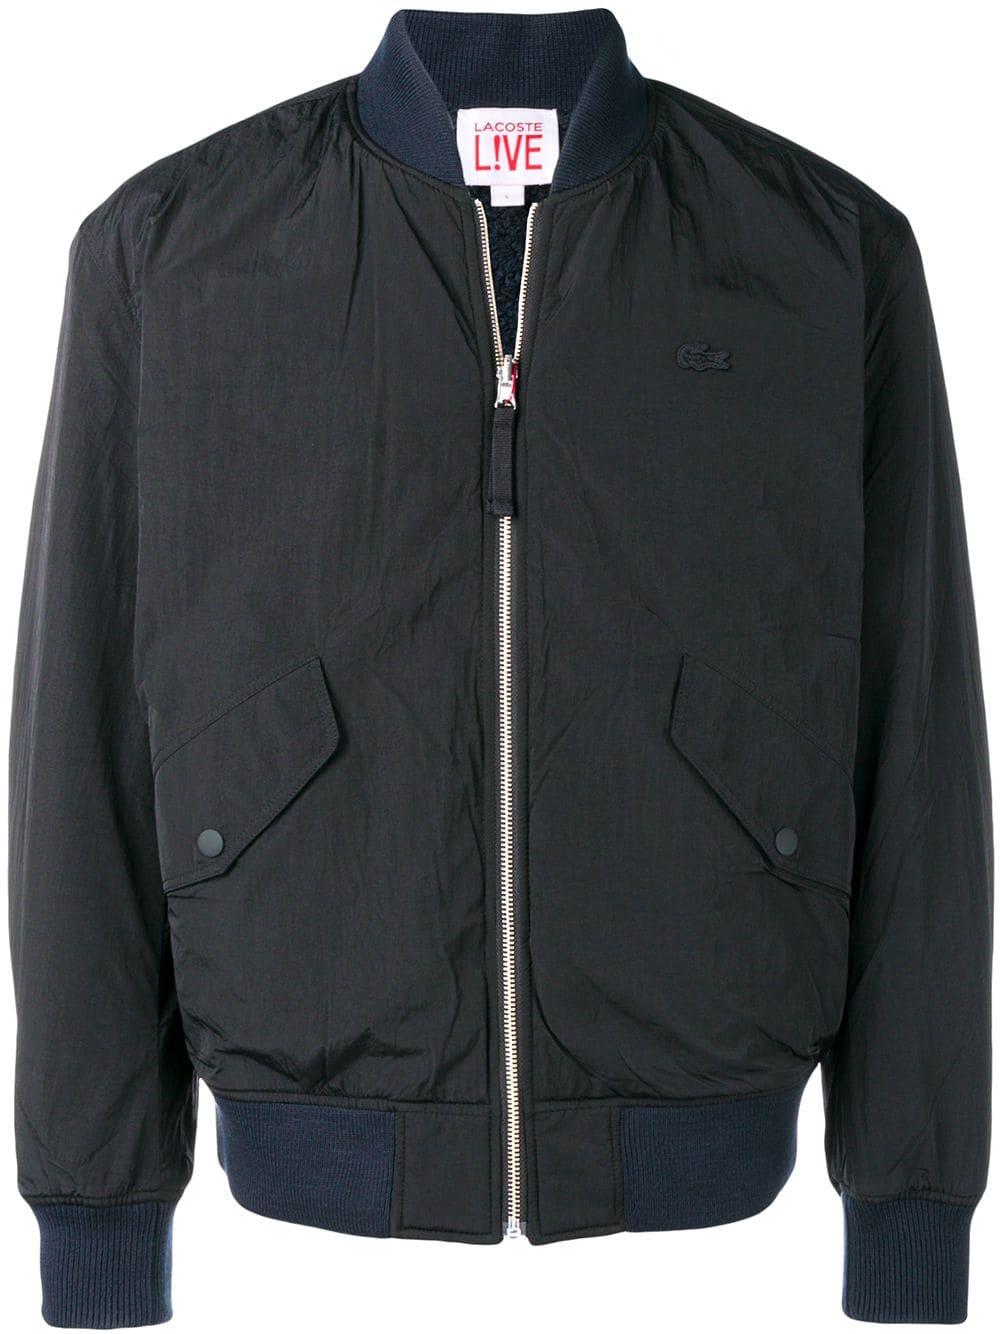 Lacoste Synthetic Reversible Bomber Jacket in Black for Men - Lyst